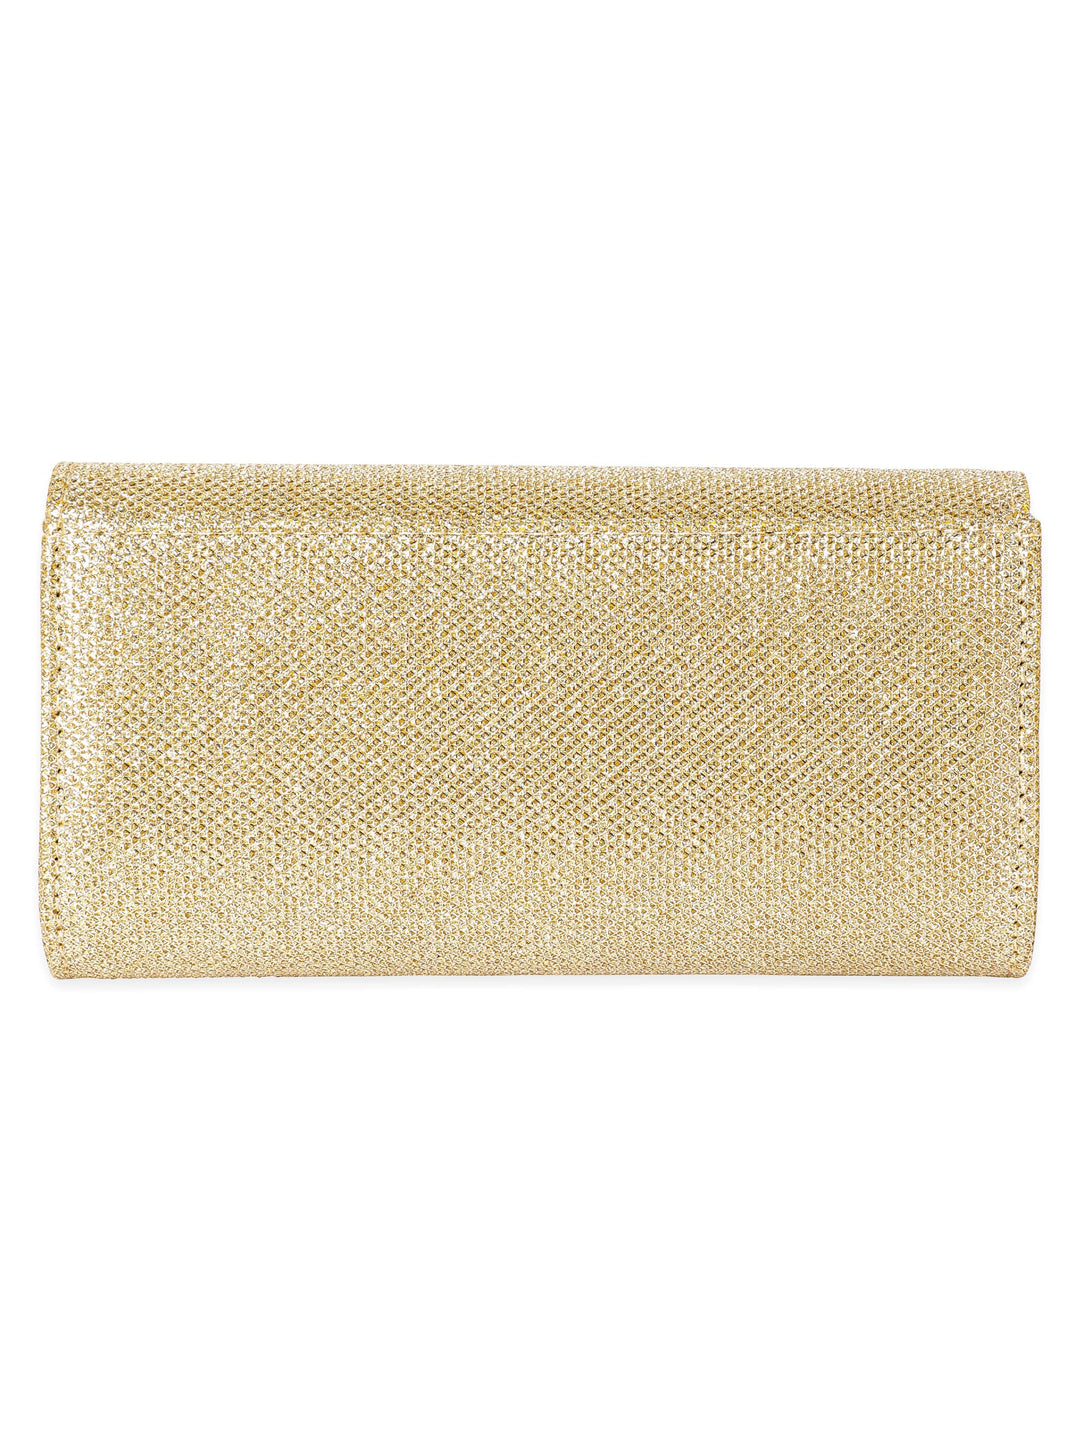 Rubans Enchanting Luminescence Handcrafted Shimmery Clutch Bag Handbag, Wallet Accessories & Clutches